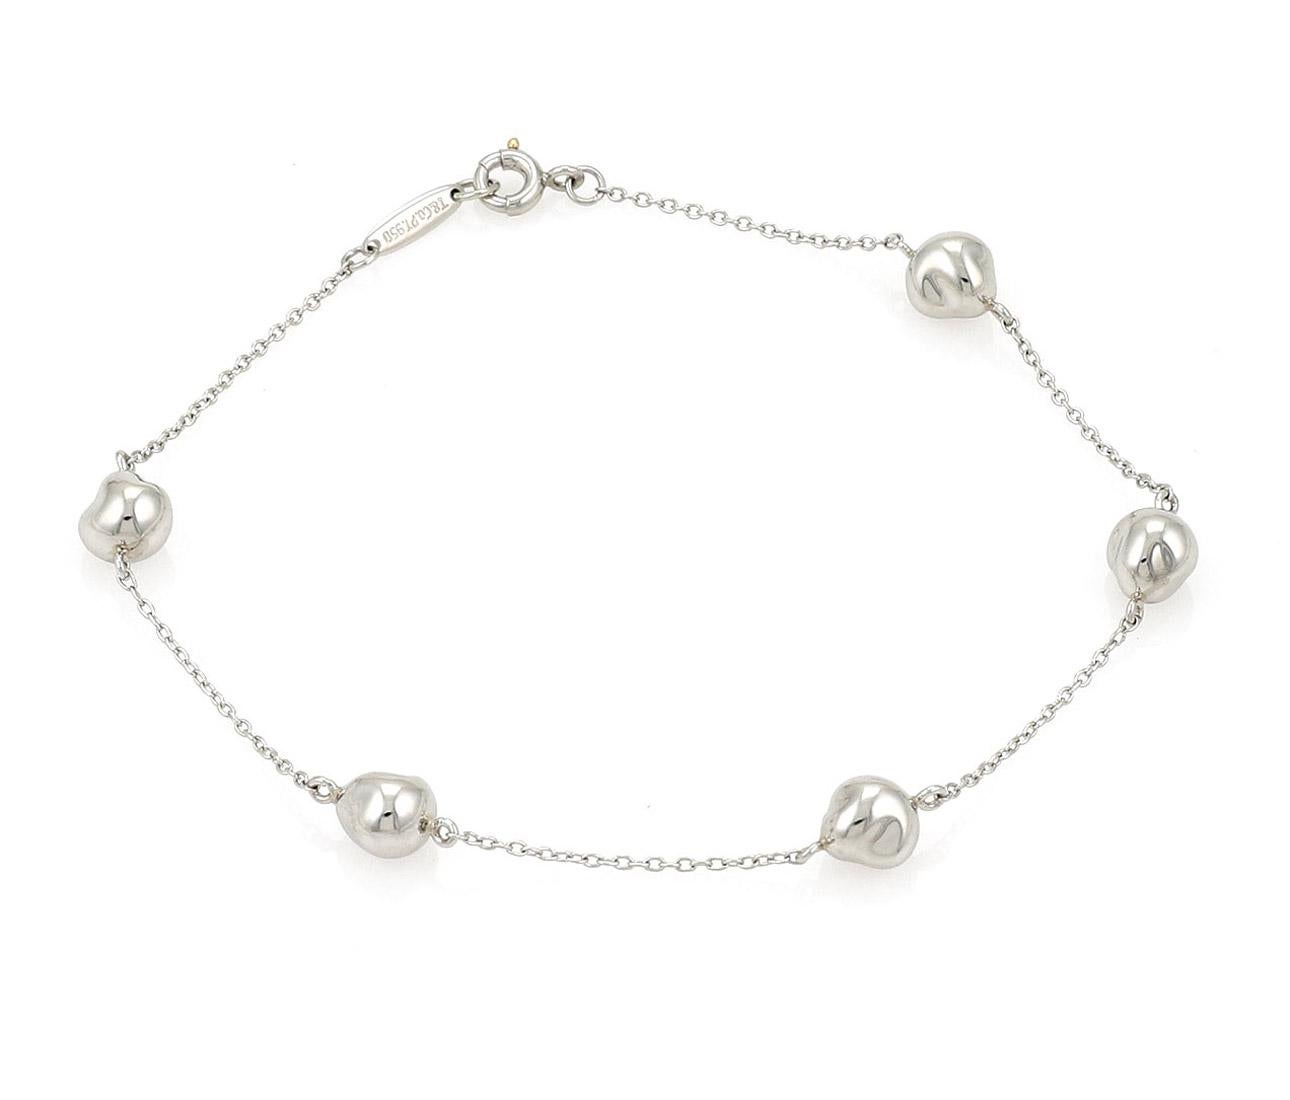 This authentic bracelet is from Tiffany & Co. by designer Elsa Peretti from her Nugget collection. It is crafted from platinum with a high polished finish featuring a chain link bracelet with 5 nugget charms. It fastens with a round clasp and is